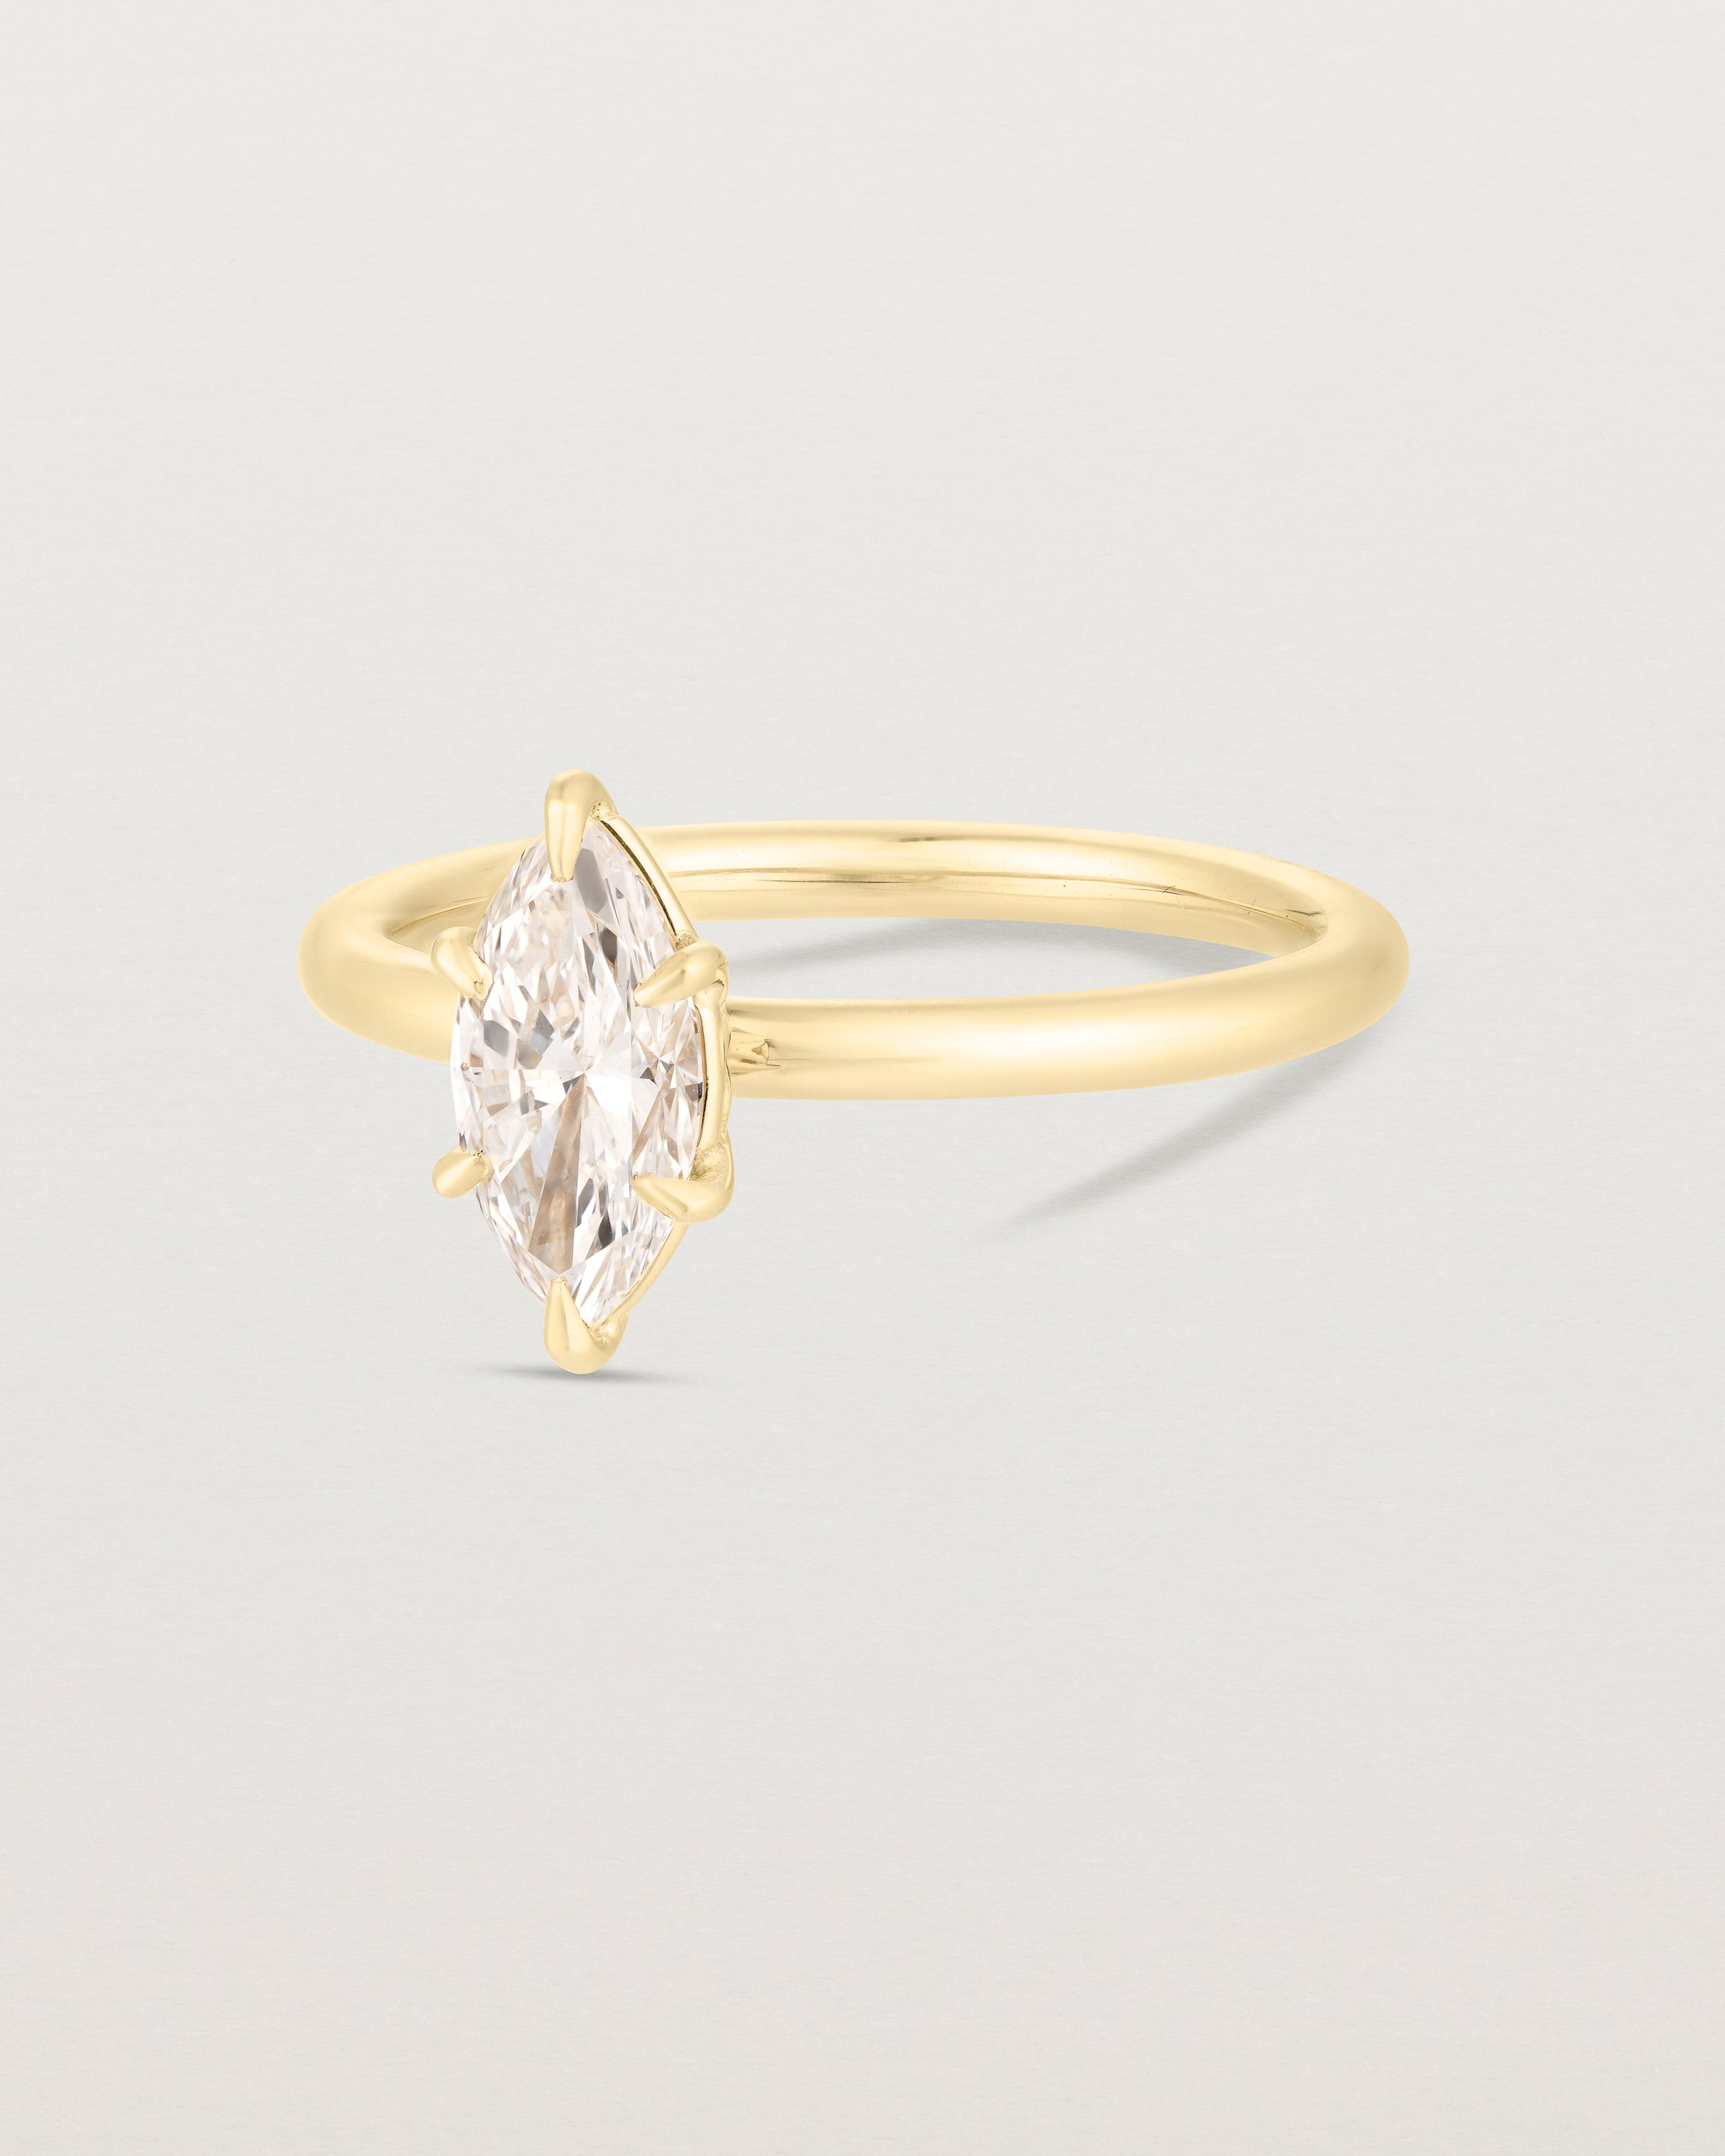 Side image of diamond marquise ring in yellow gold